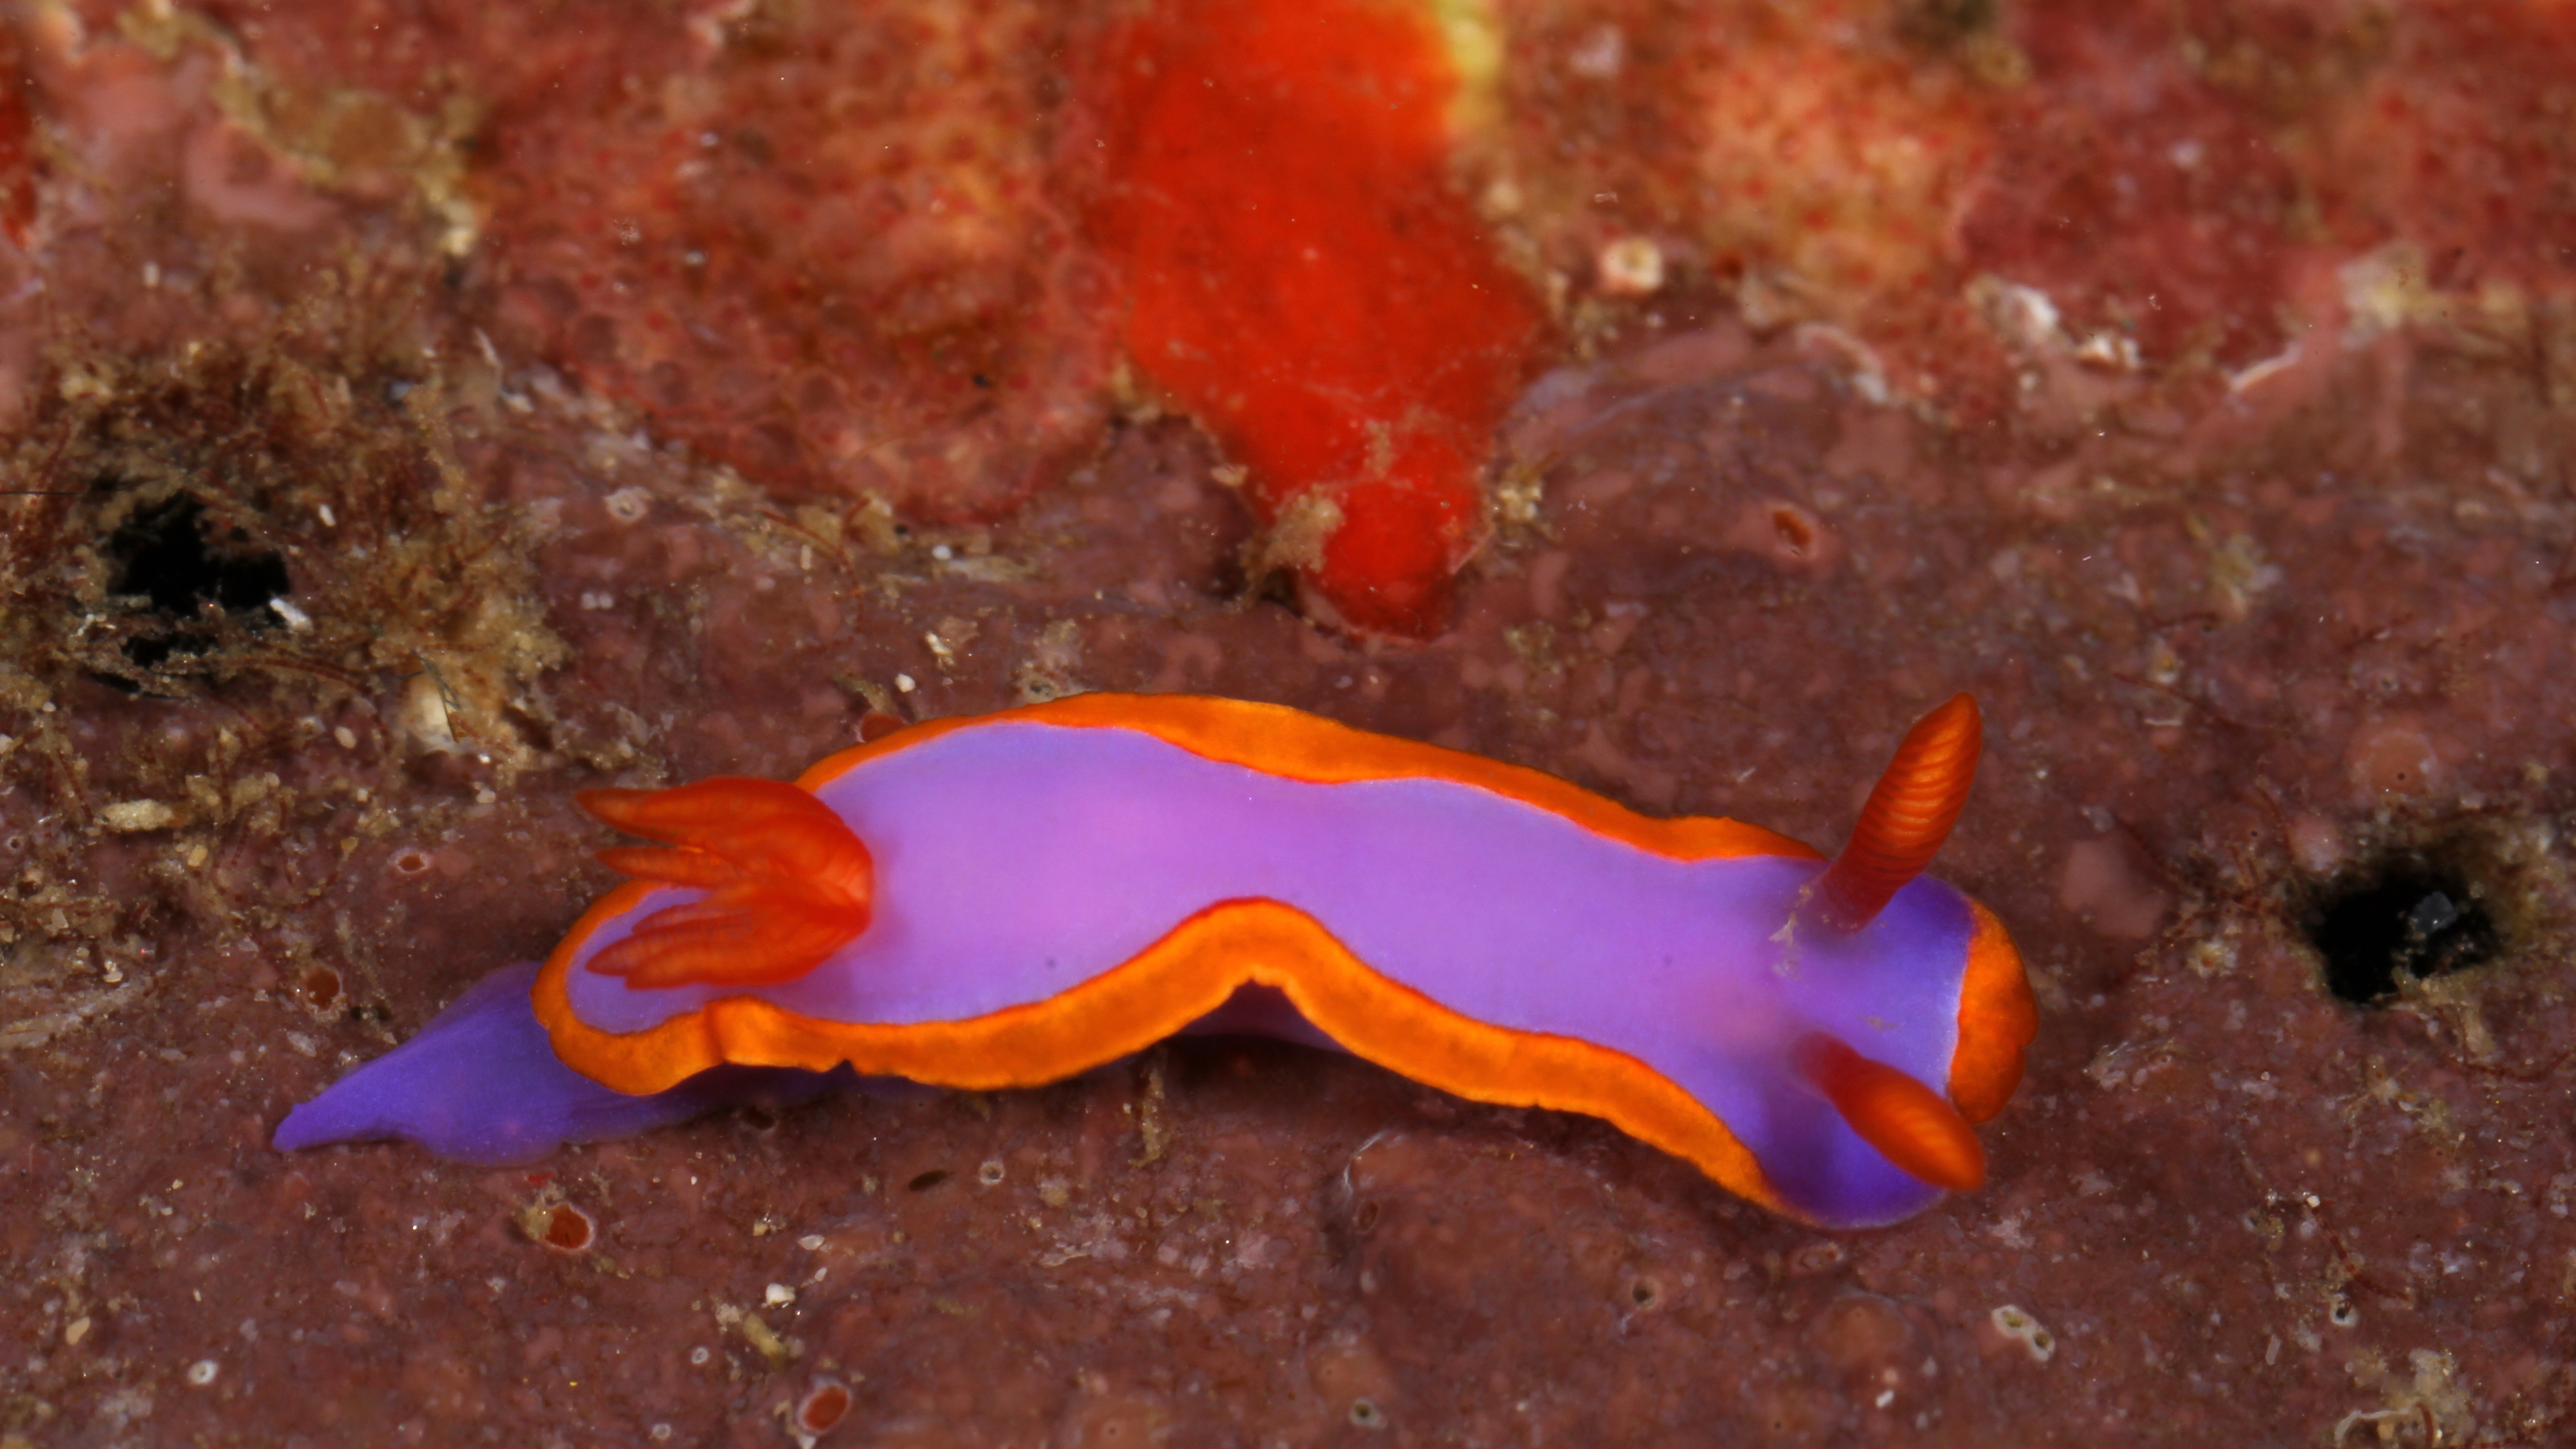 Thorunna genus, one of the 40 new varieties of sea slugs, colorful nudibranchs with poisonous adaptations.  (California Academy of Sciences)